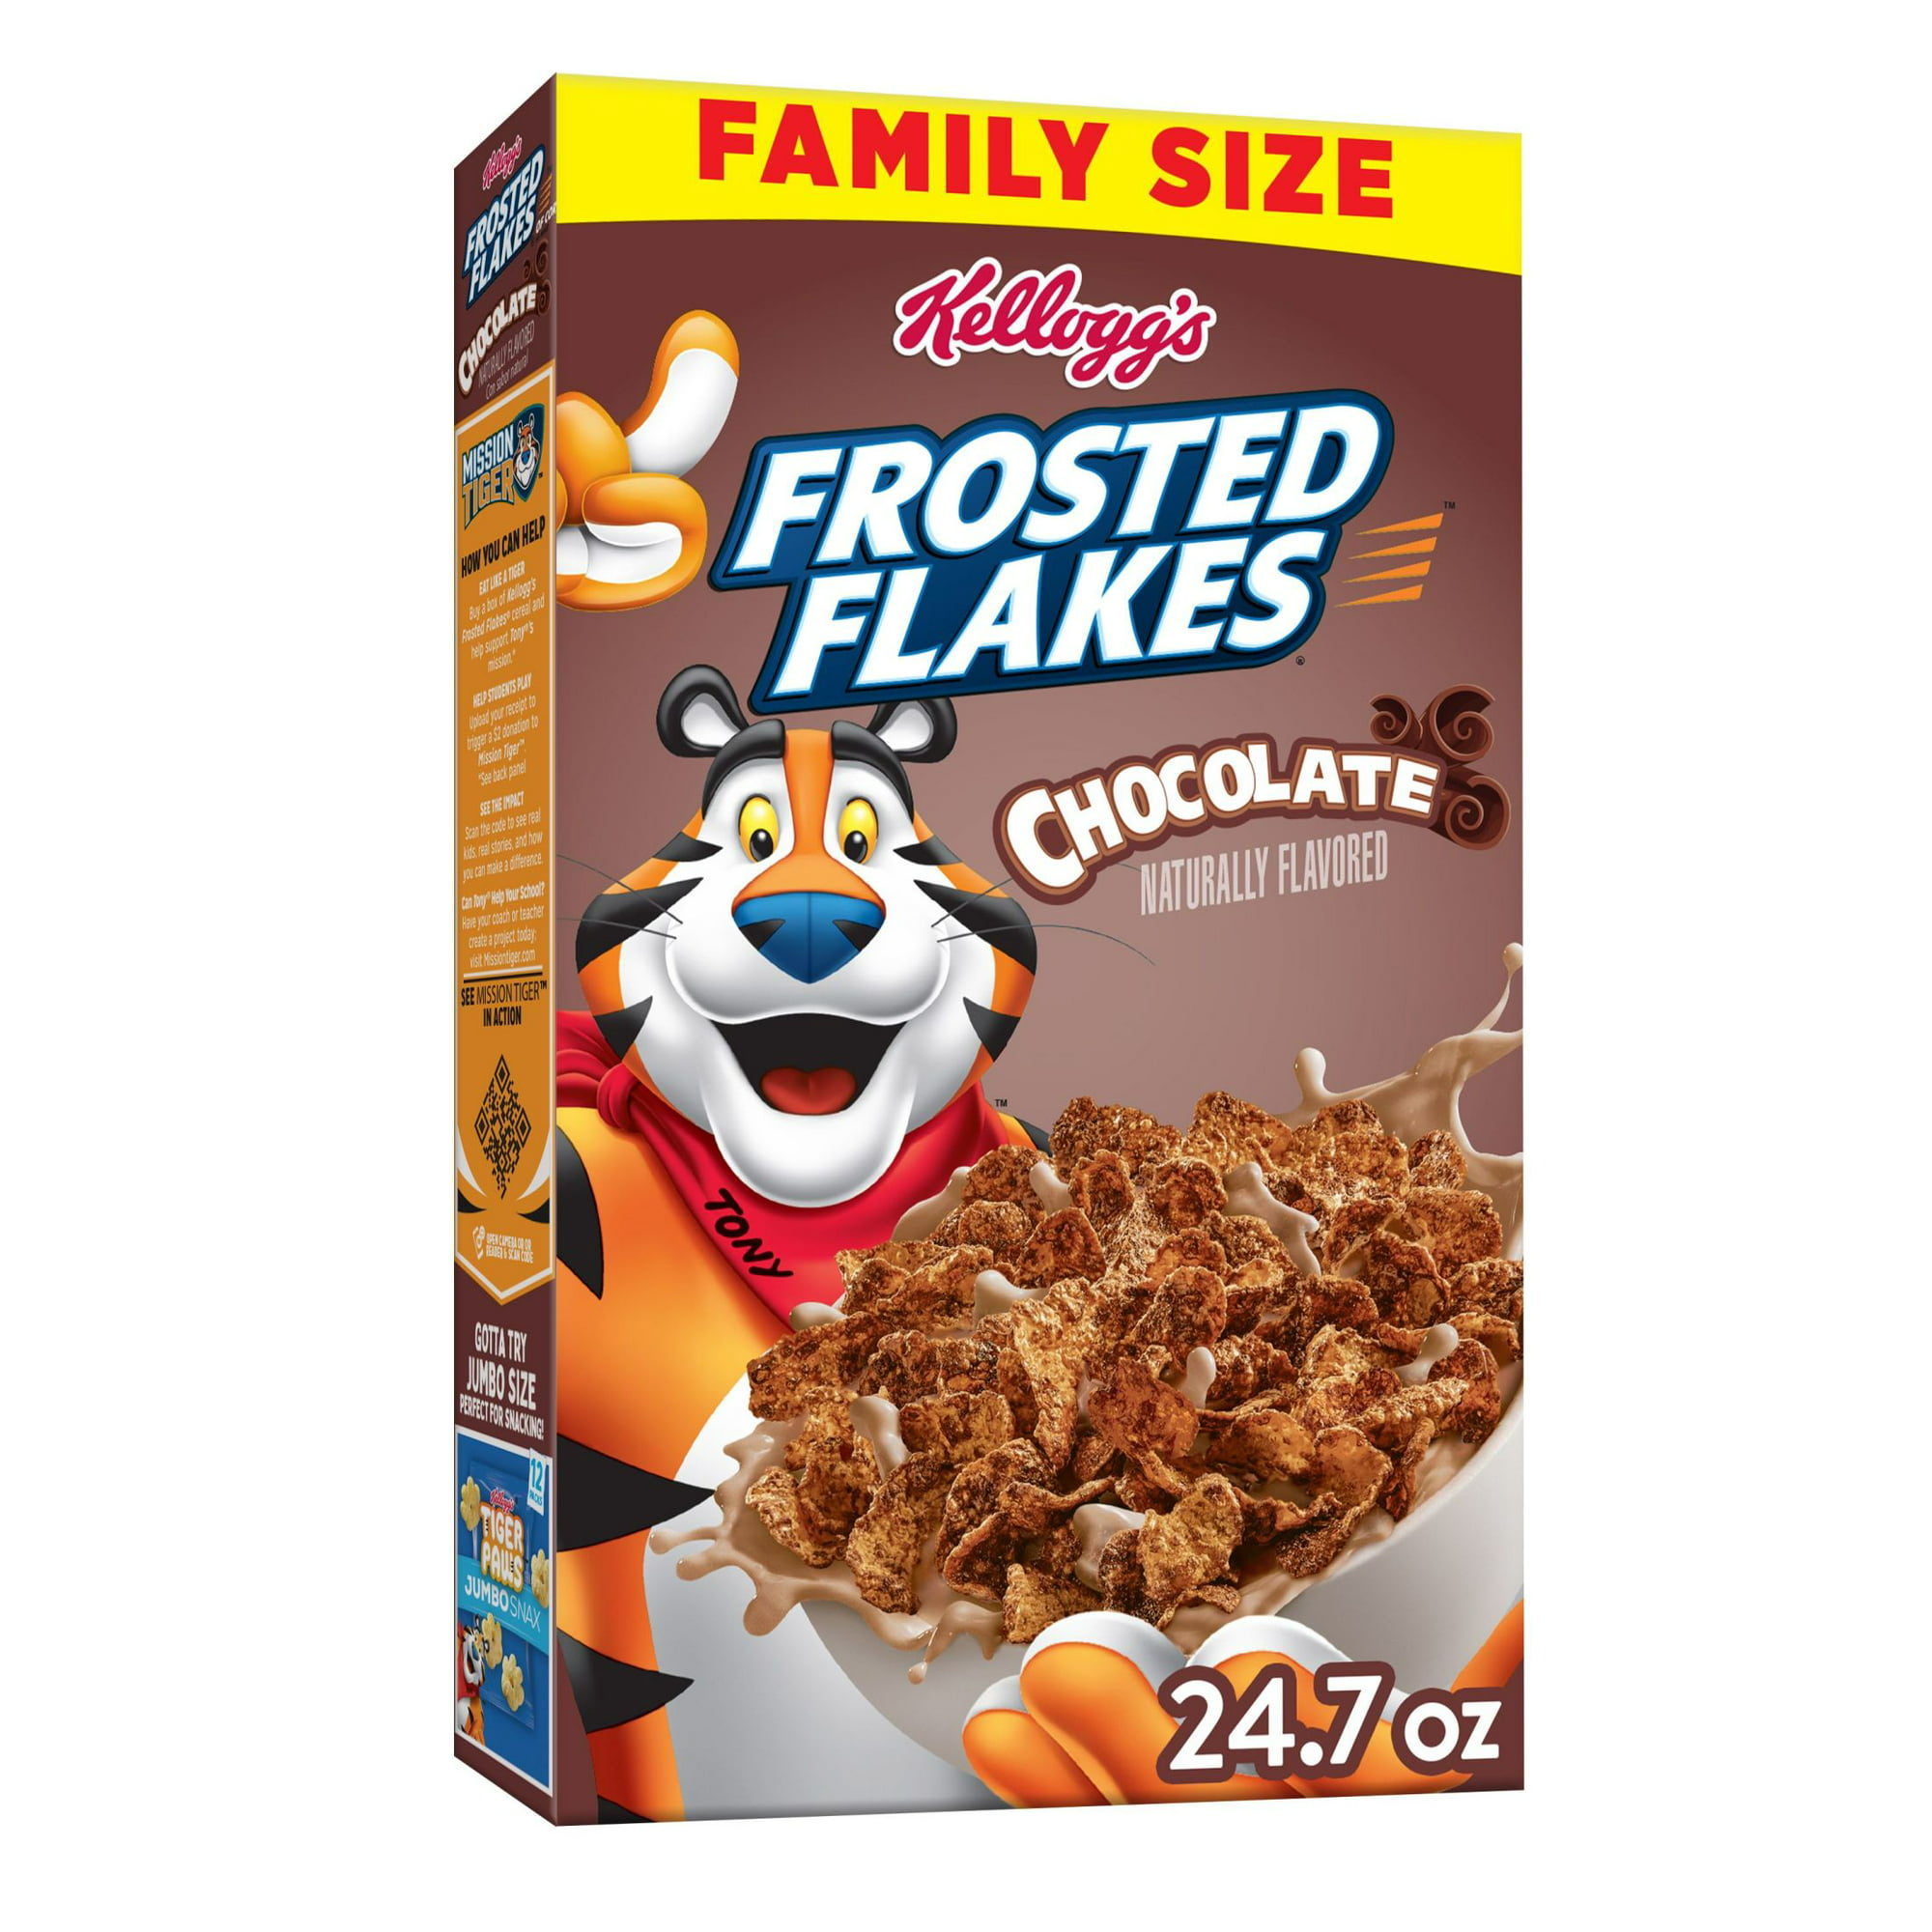 Kellogg's Frosted Flakes Chocolate Cold Breakfast Cereal, 24.7 oz